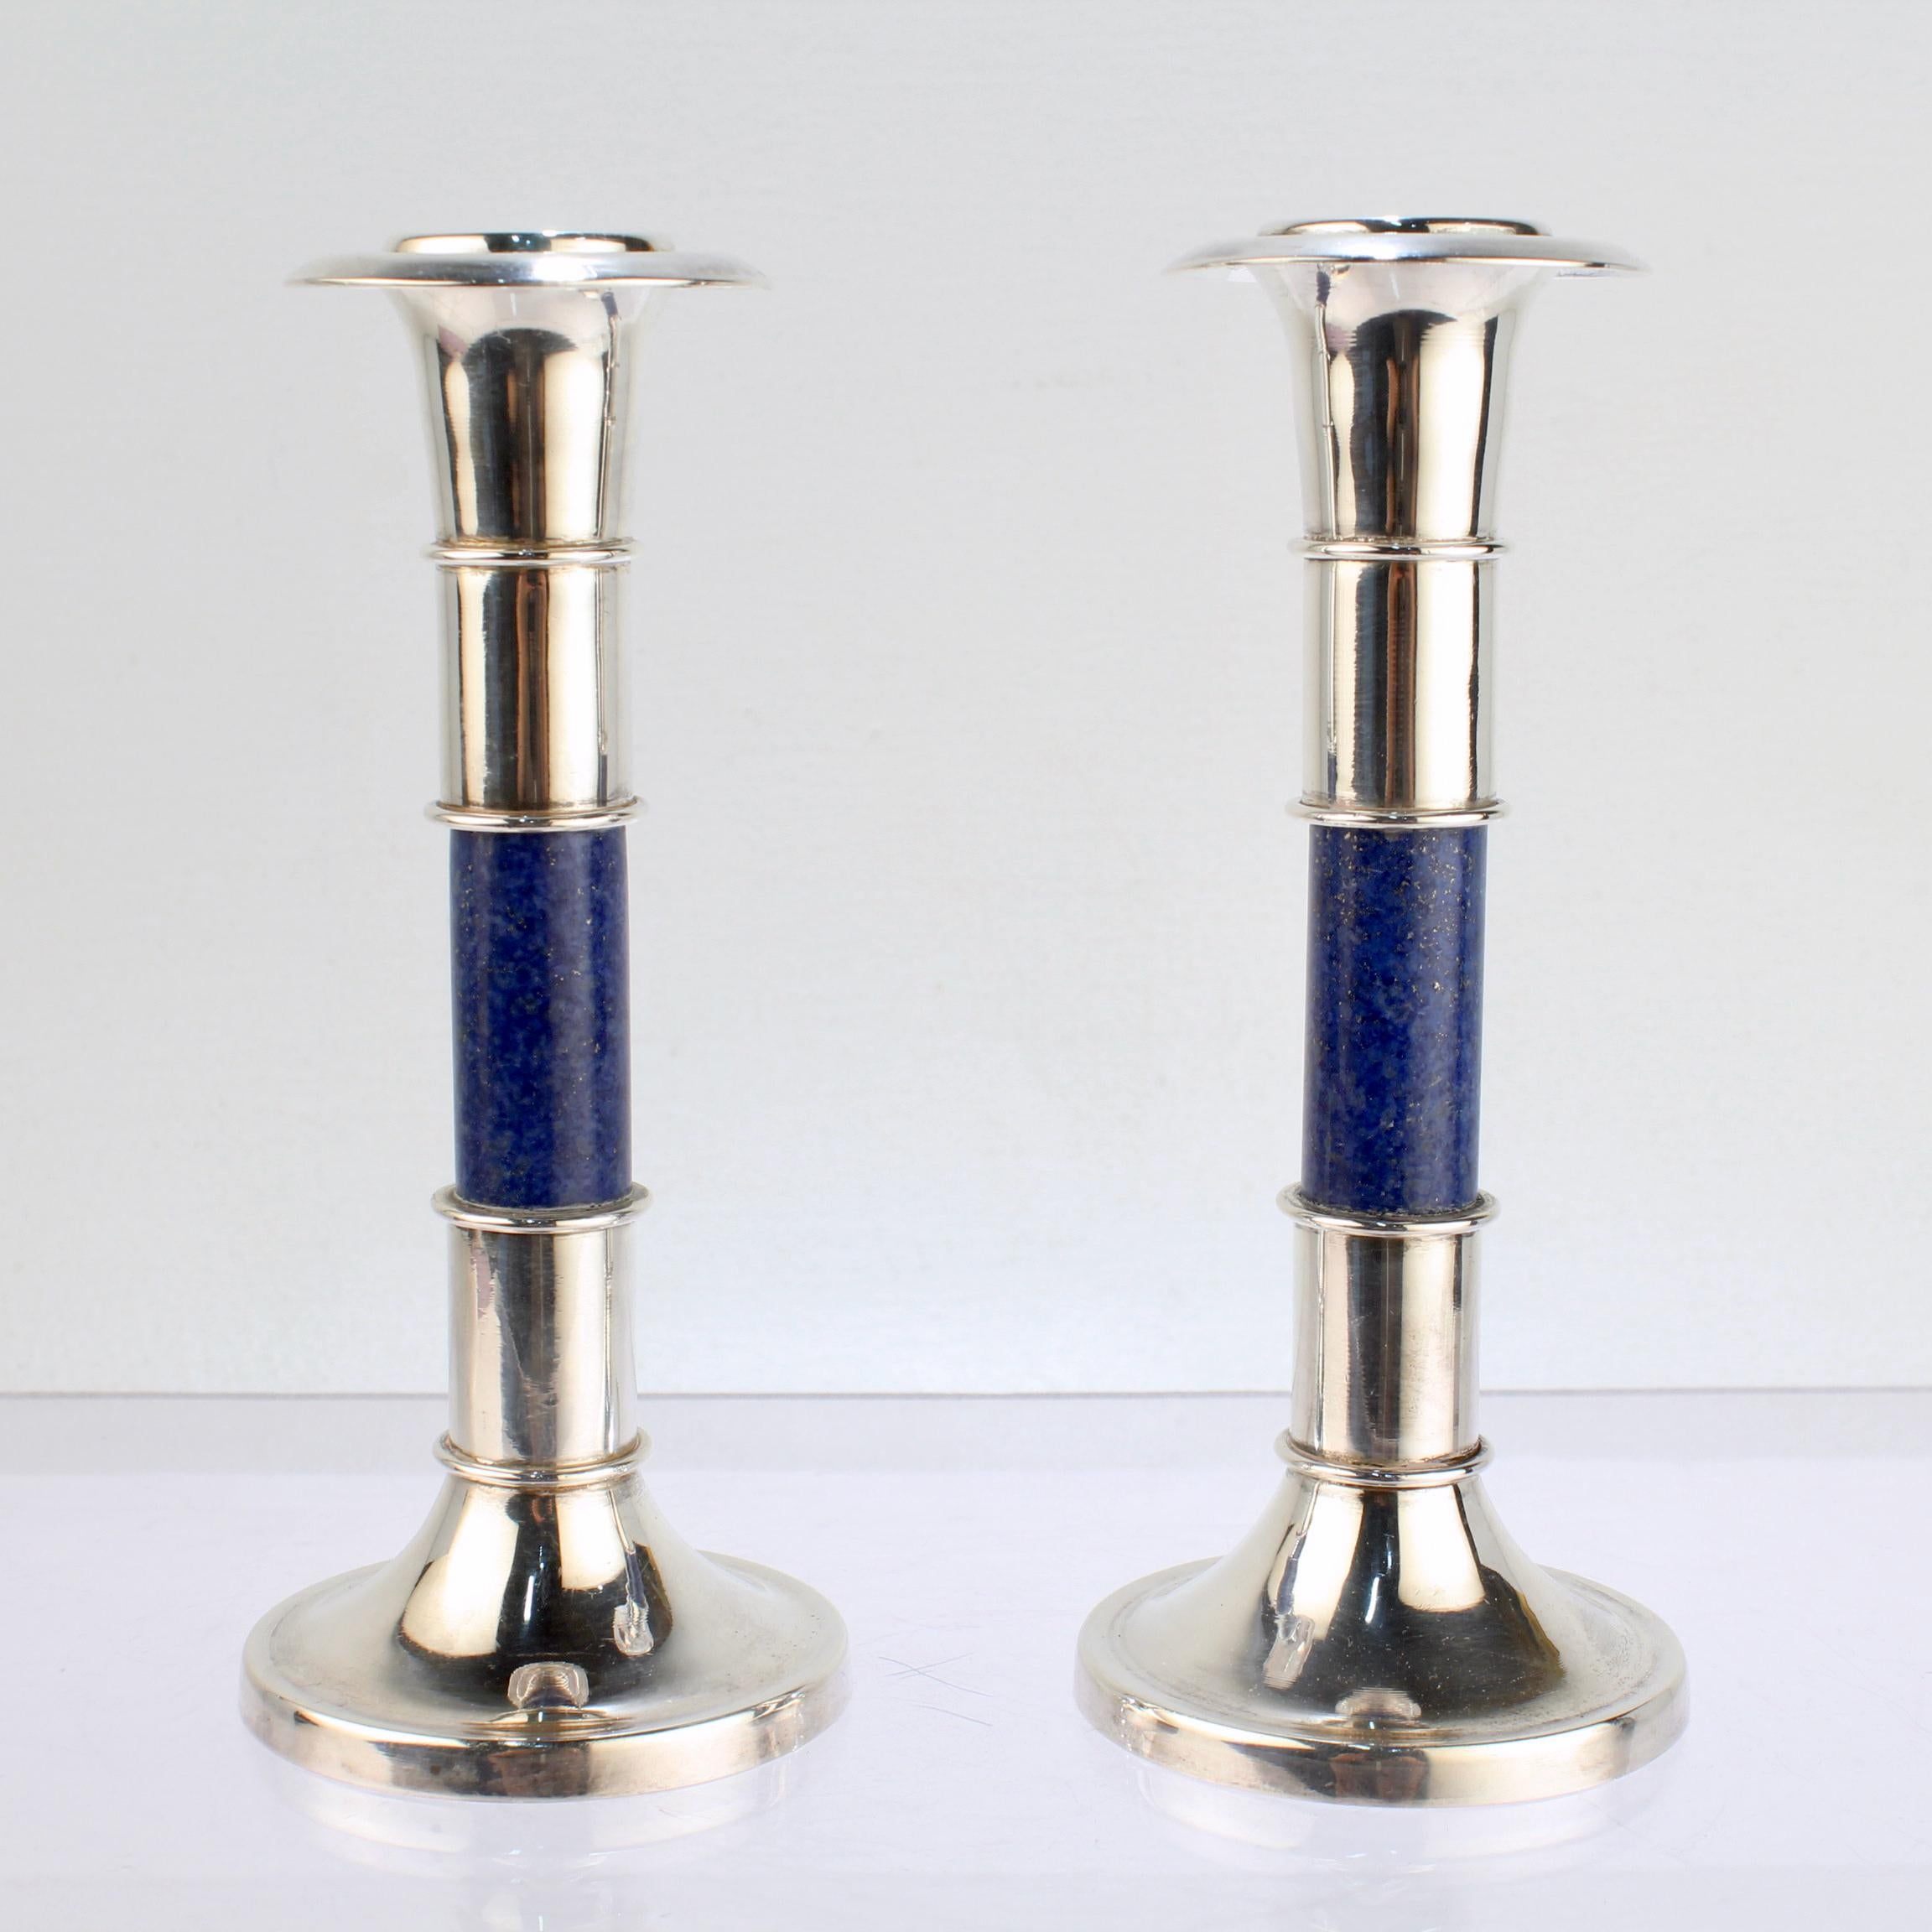 A fine pair of modern candlesticks.

Comprised of sterling silver and lapis lazuli. 

Simply wonderful candlesticks!

Date:
20th Century

Overall Condition:
It is in overall good, as-pictured, used estate condition. There are a few slight bends and